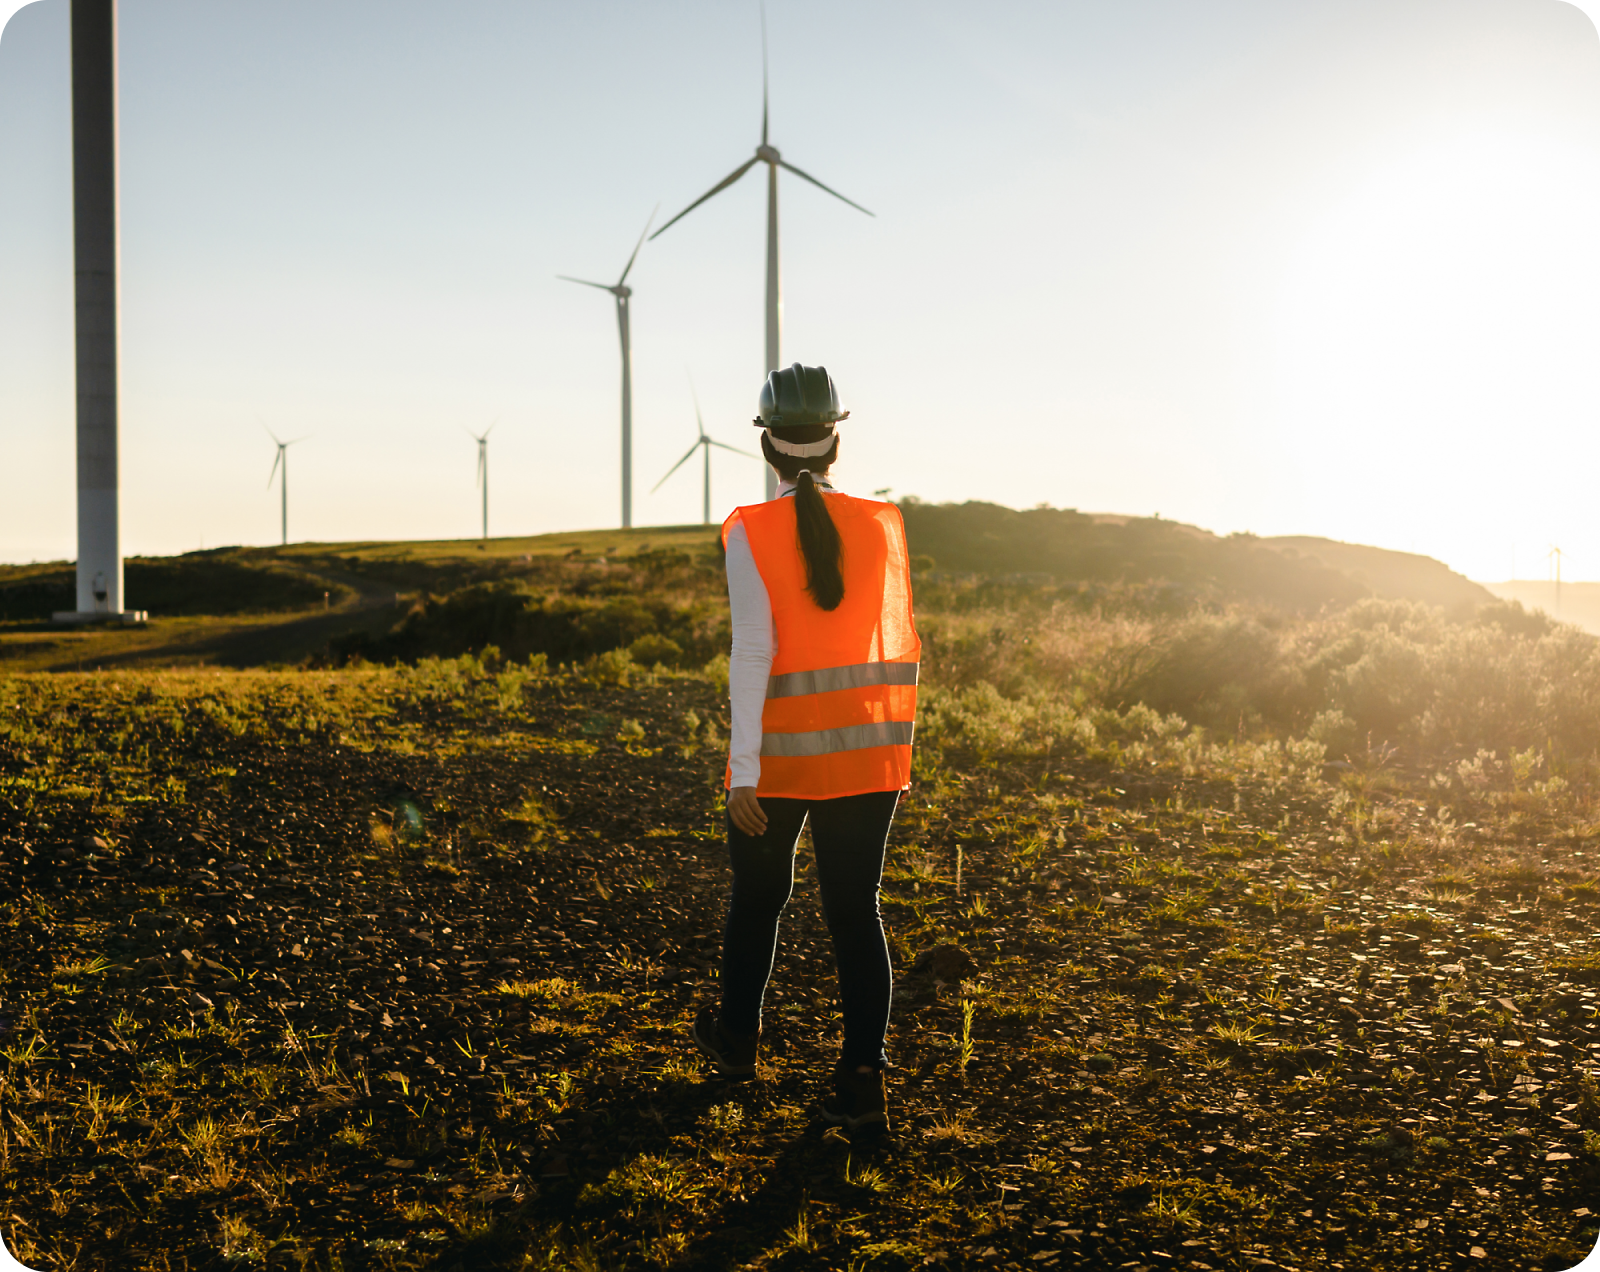 A person wearing a hard hat and orange safety vest stands in a field, looking at wind turbines during a sunset.